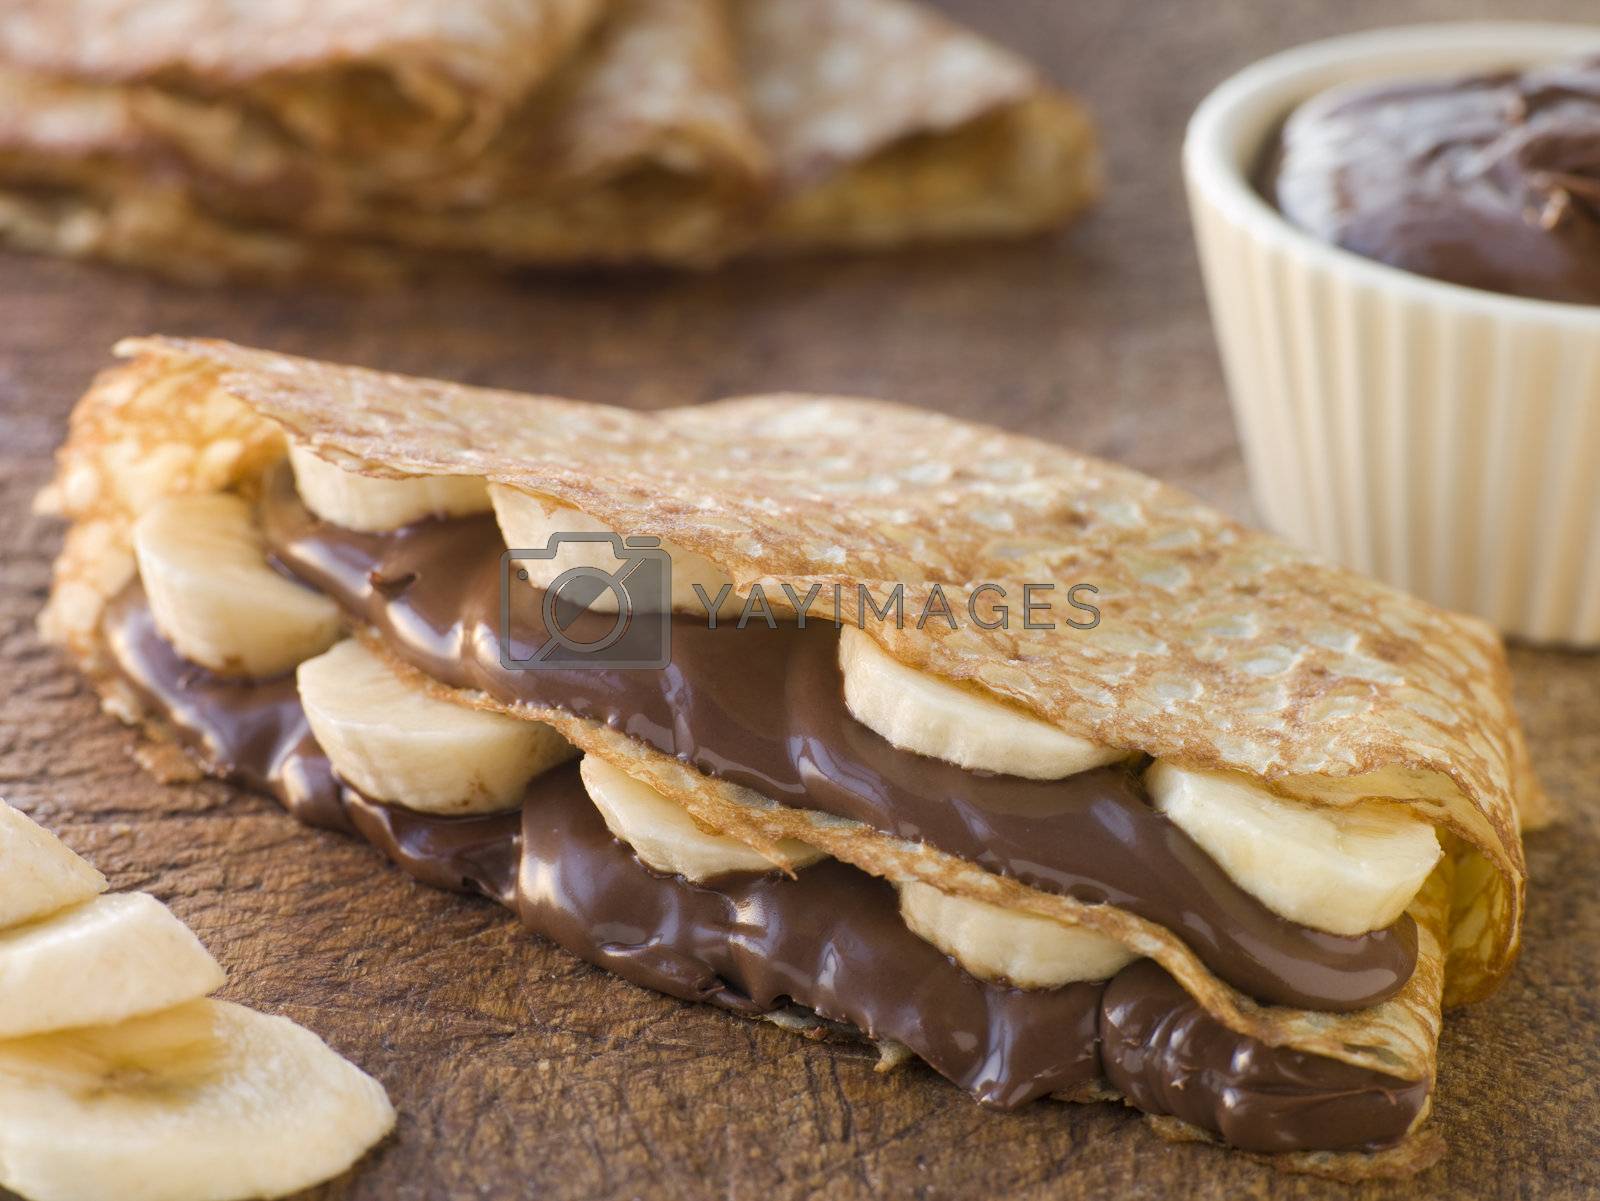 Royalty free image of Crepes filled with Banana and Chocolate Hazelnut Spread by MonkeyBusiness